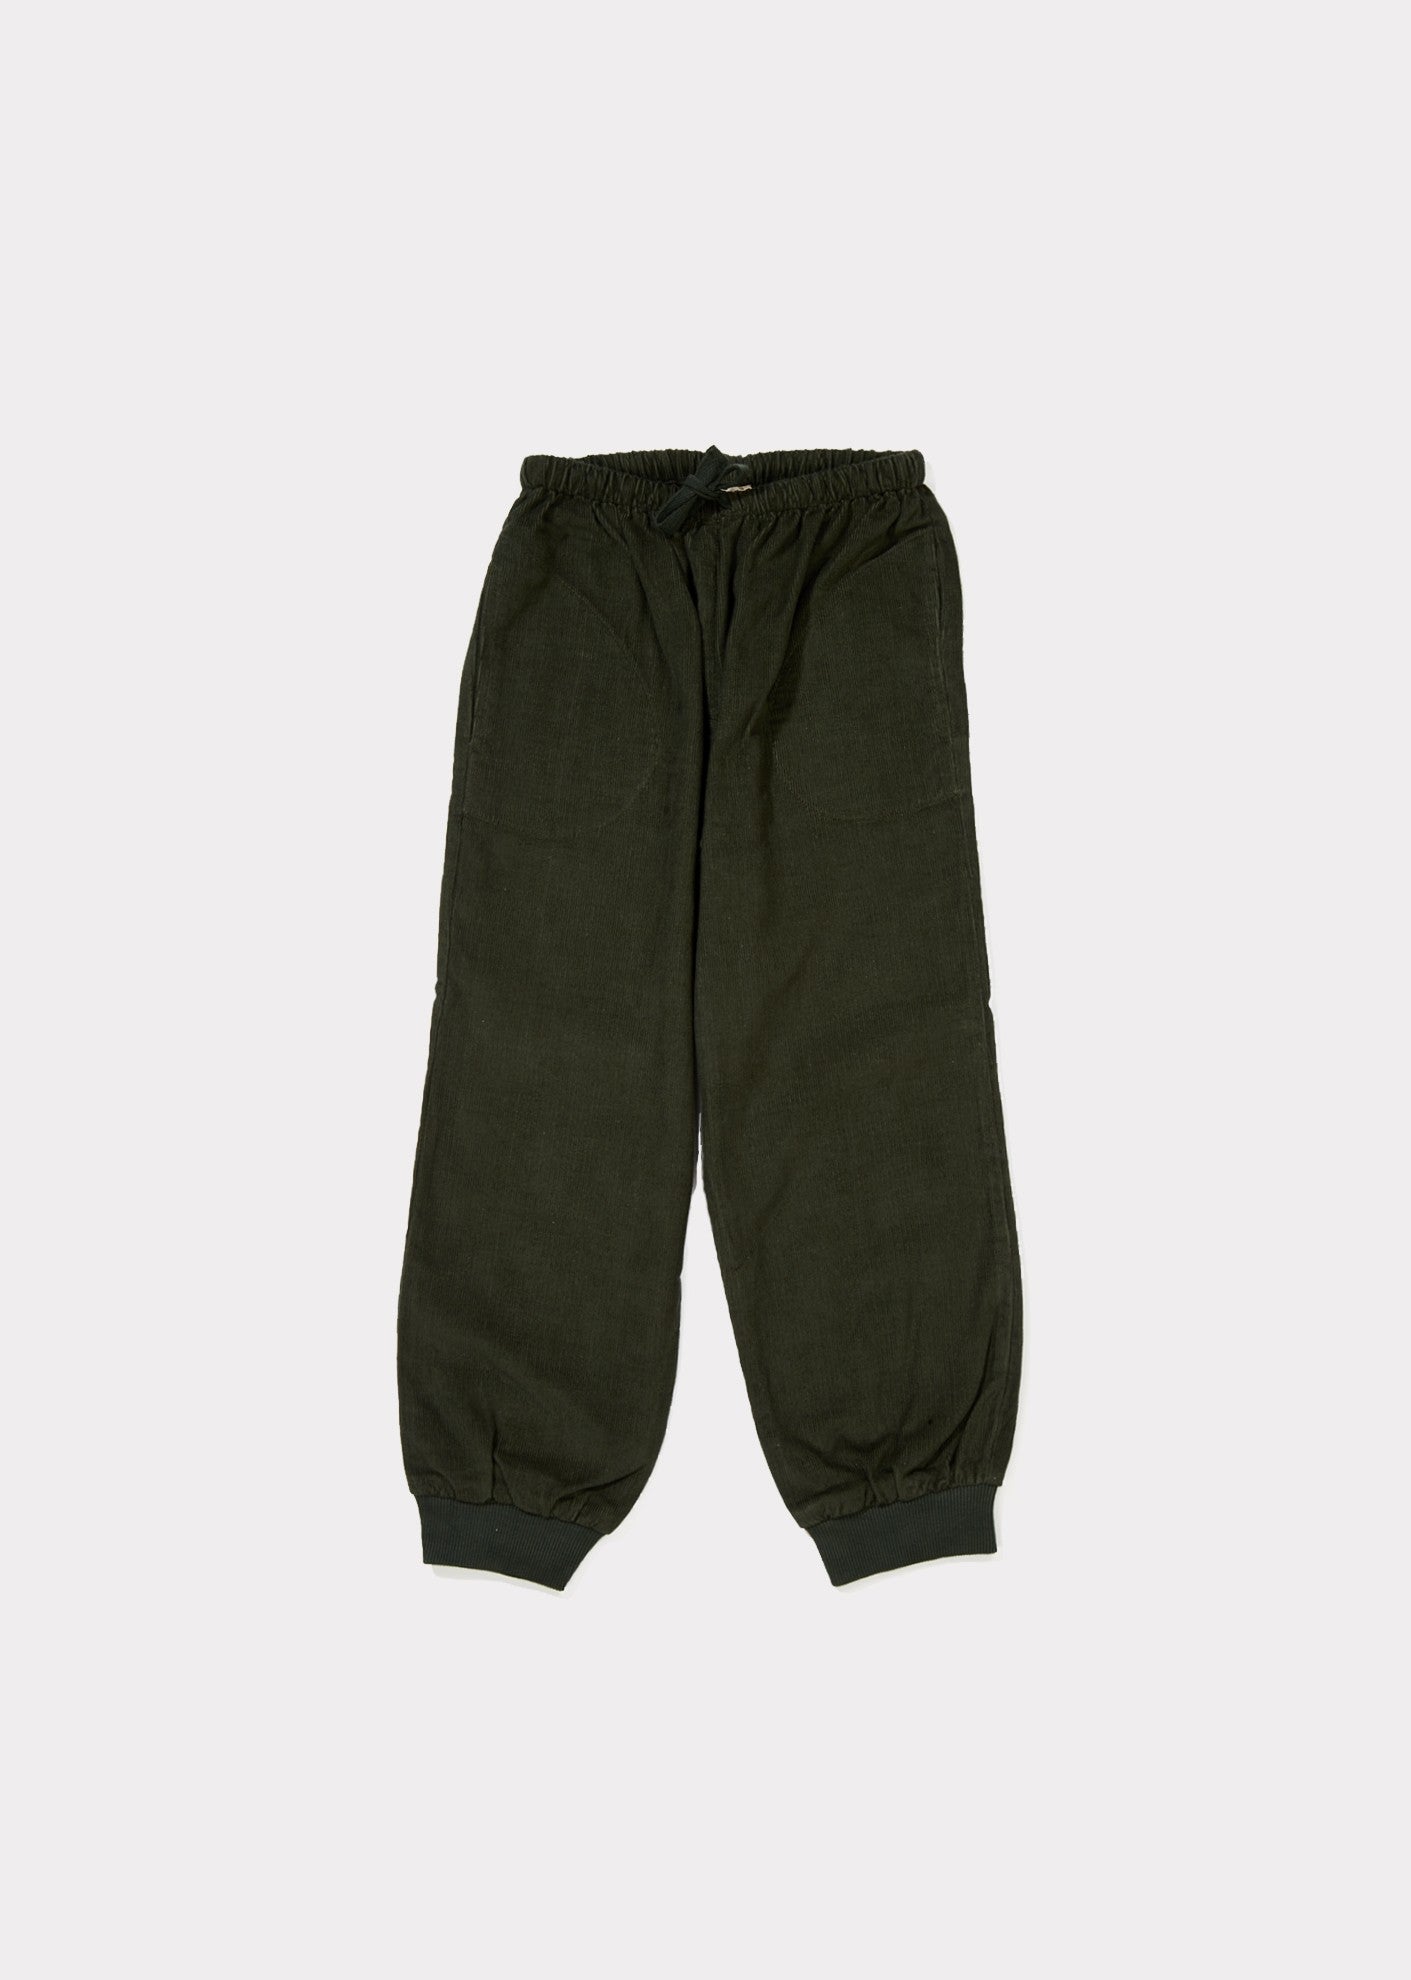 Boys & Girls Forest Green Cotton Trousers